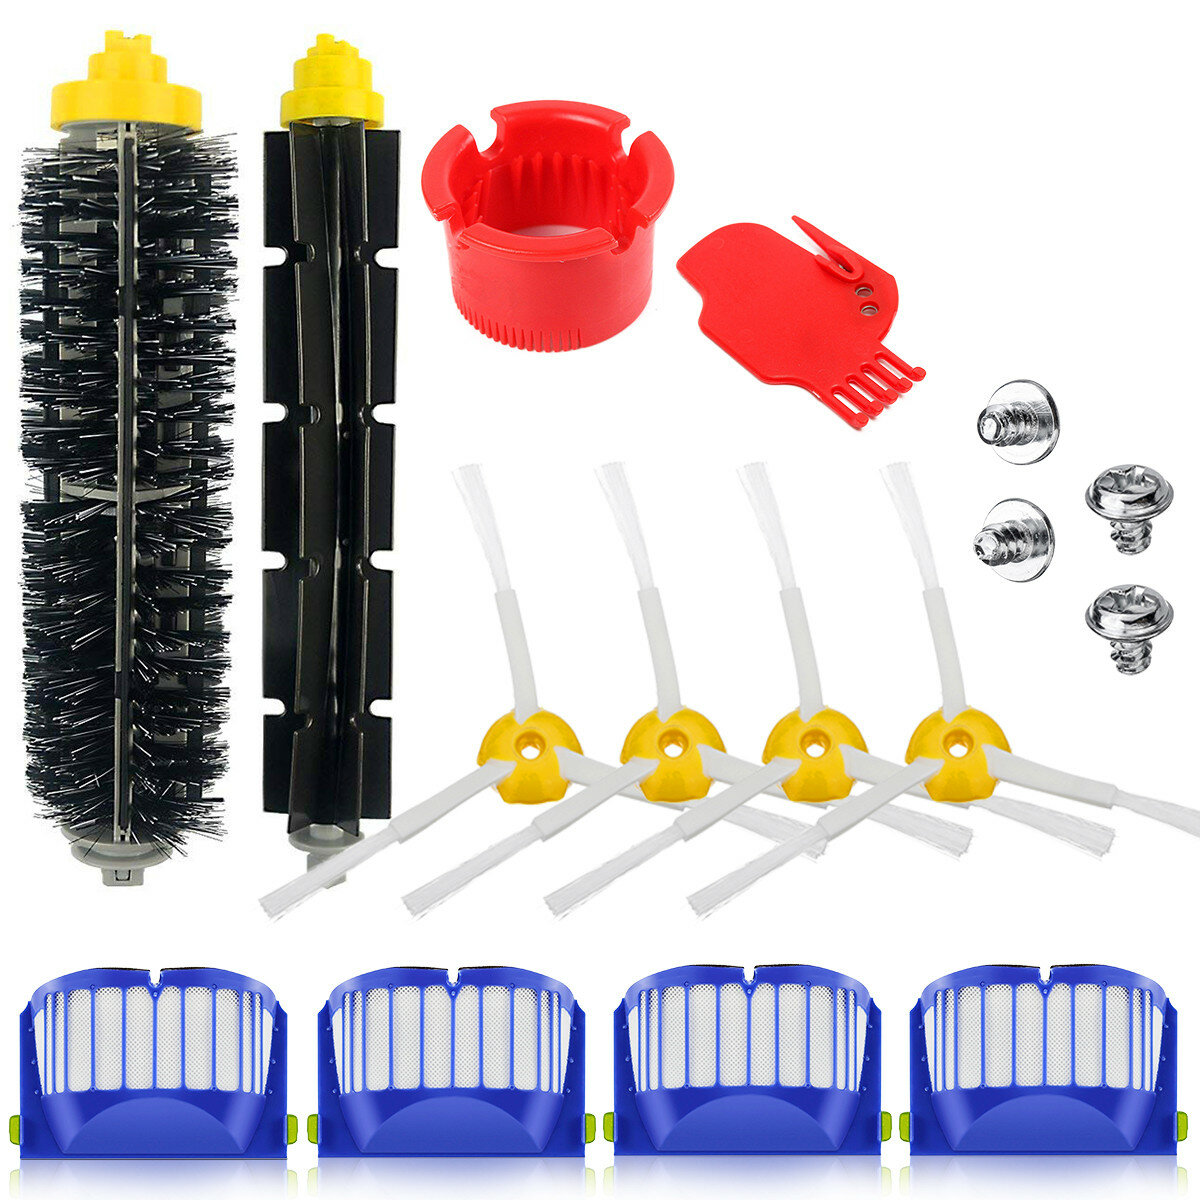 

16pcs Replacements for iRobot Roomba 650 620 610 600 Vacuum Cleaner Parts Accessories Main Brushes*2 Side Brushes*4 HEPA